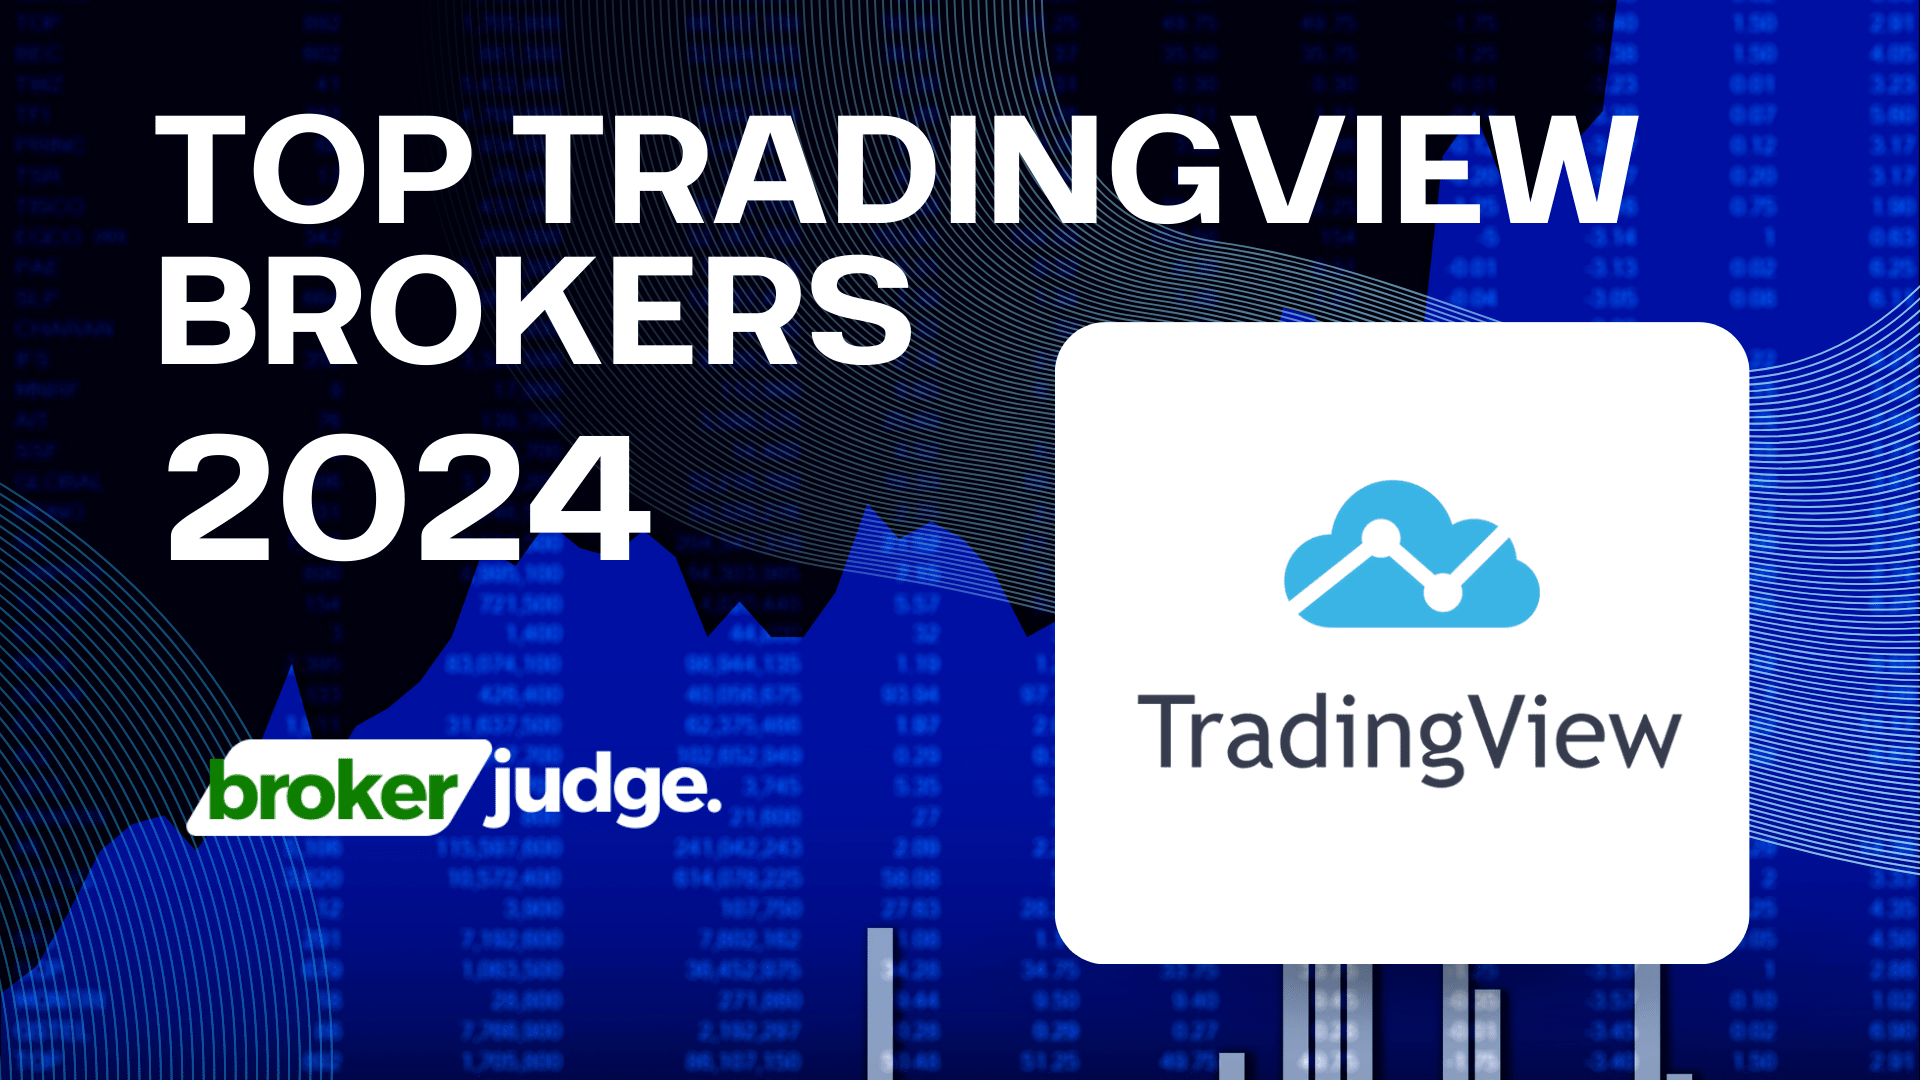 Top Trading View Brokers